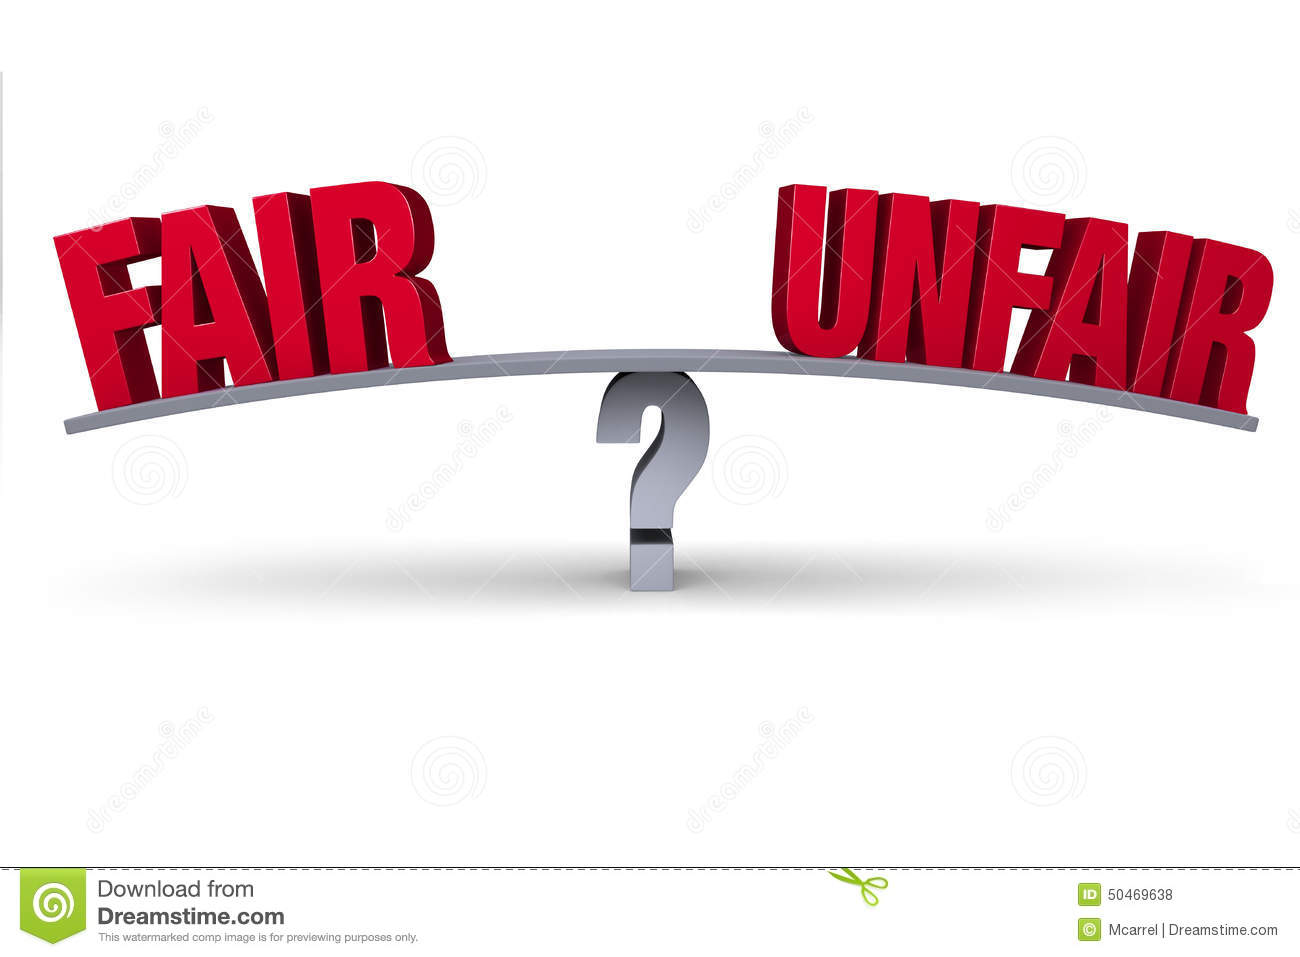 fair-unfair-red-sit-opposite-ends-gray-board-balanced-gray-question-mark-white-50469638